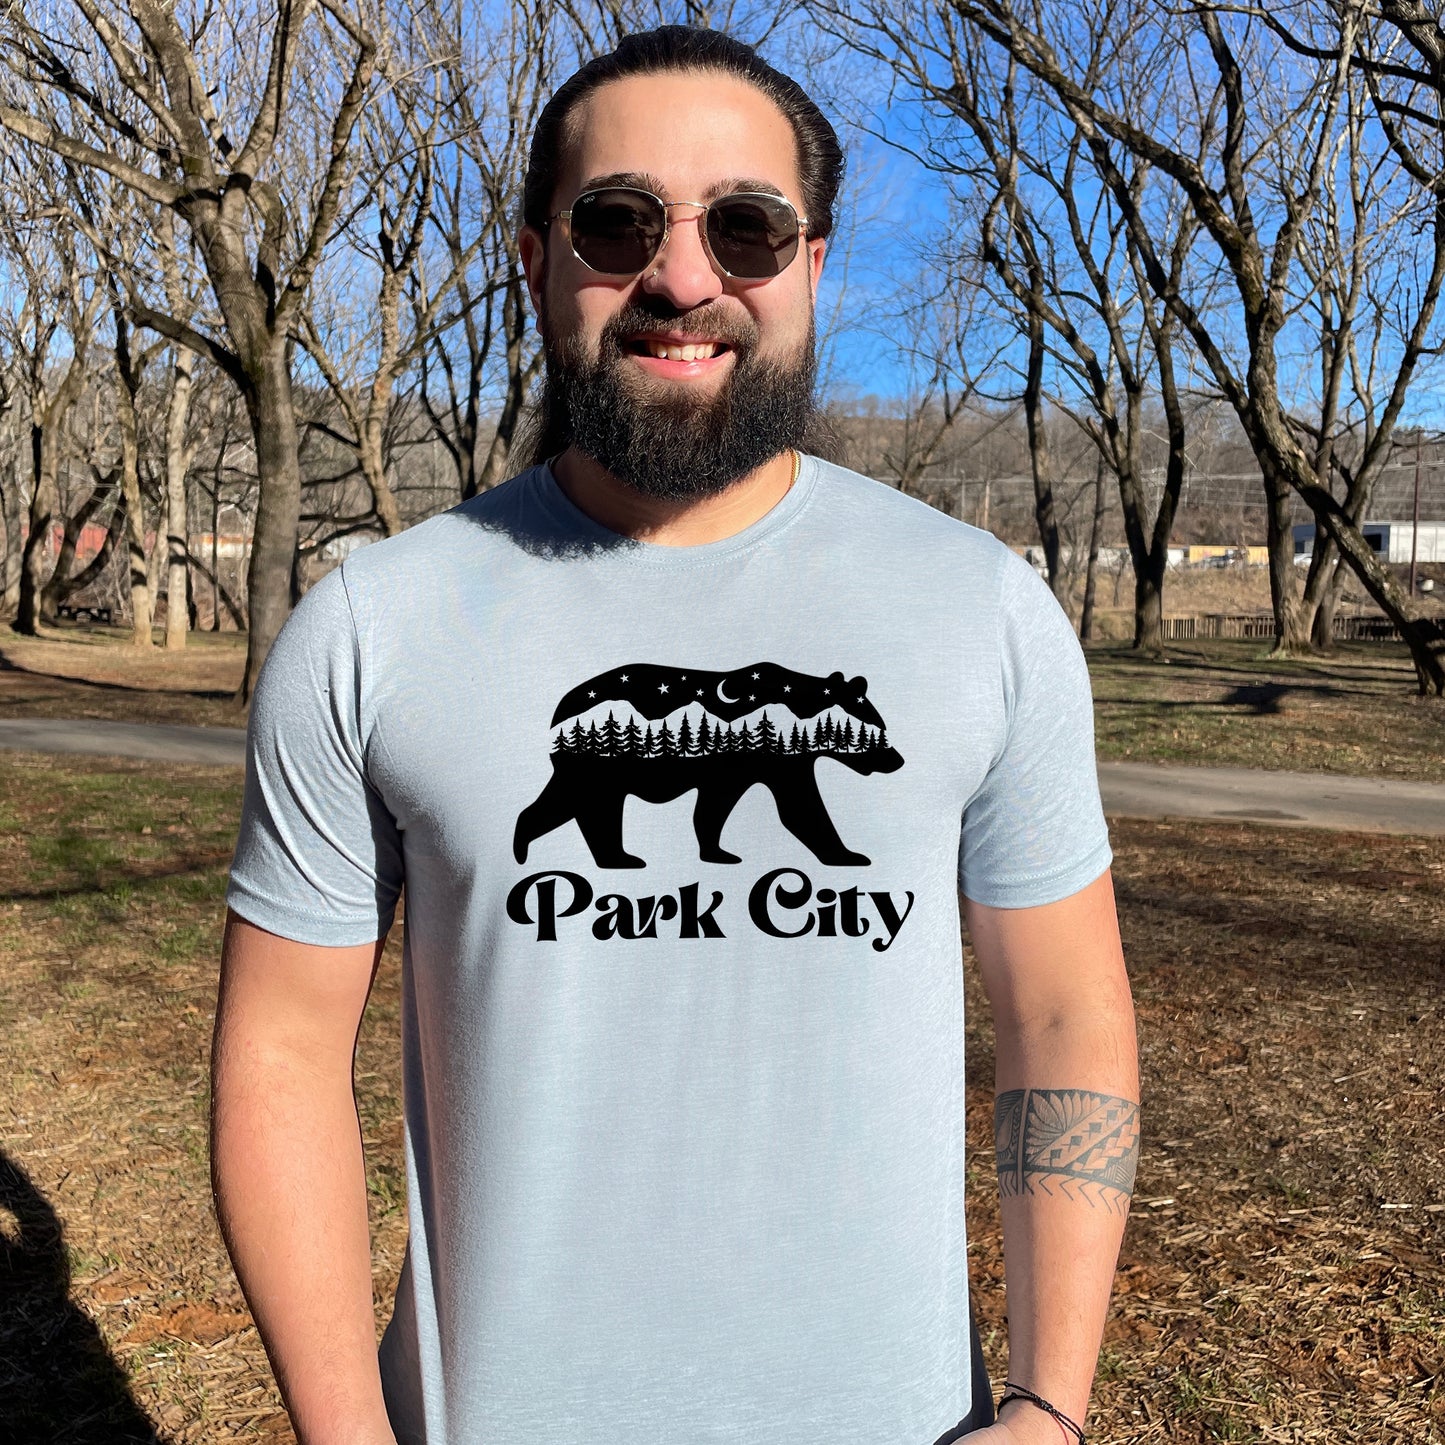 a man wearing a park city t - shirt and sunglasses